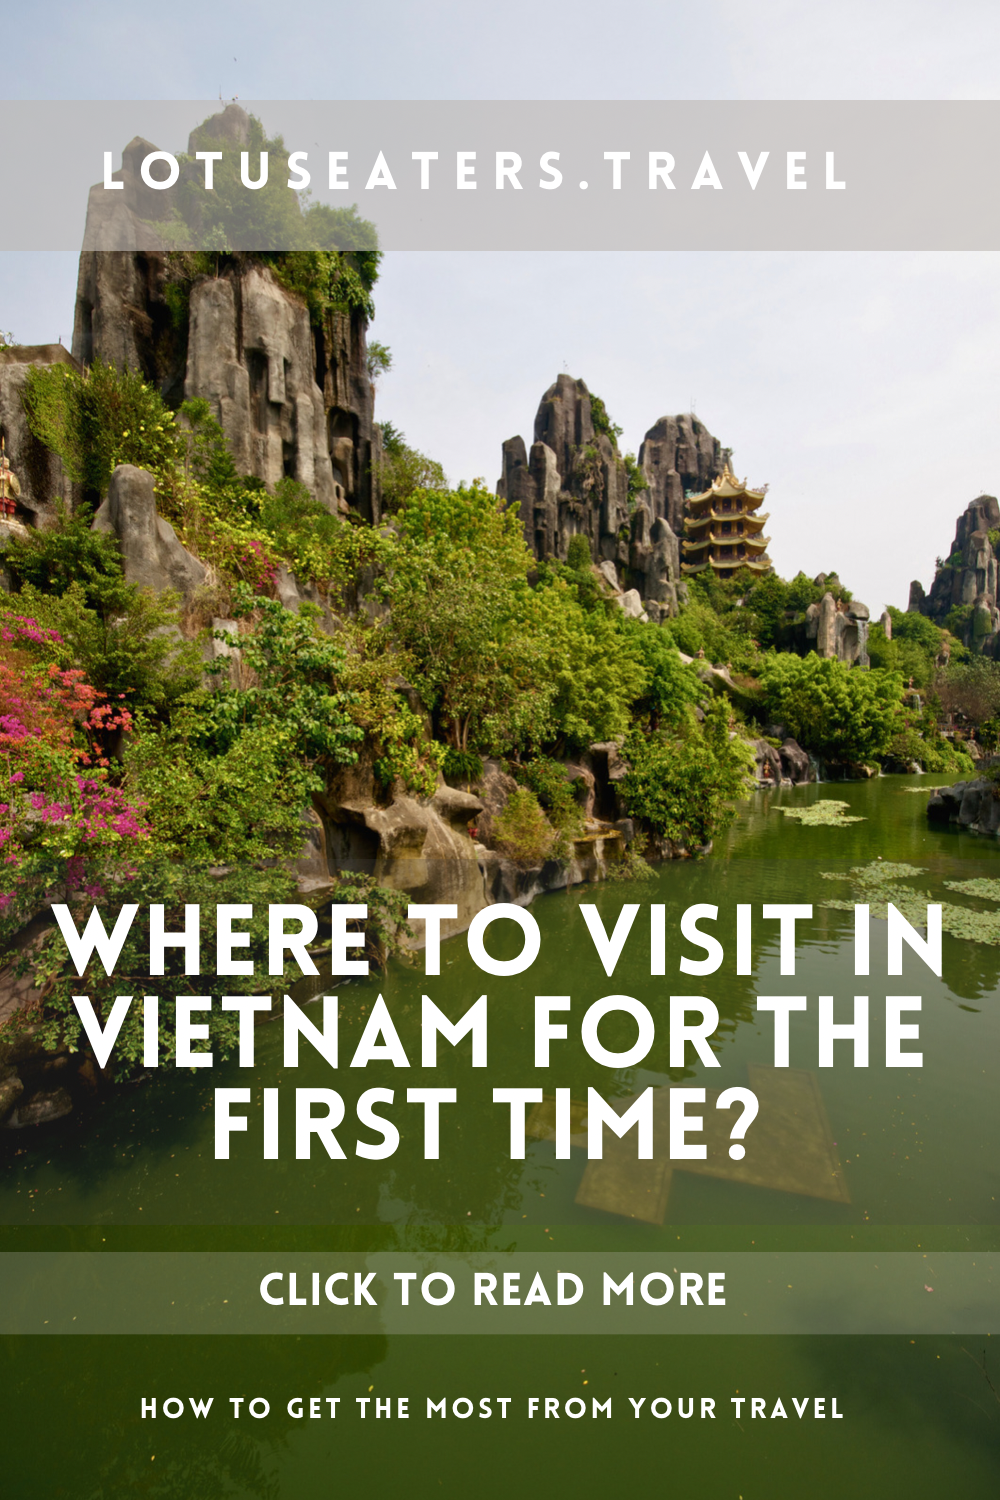 Where to visit in Vietnam for the first time for an epic trip: All you need to know